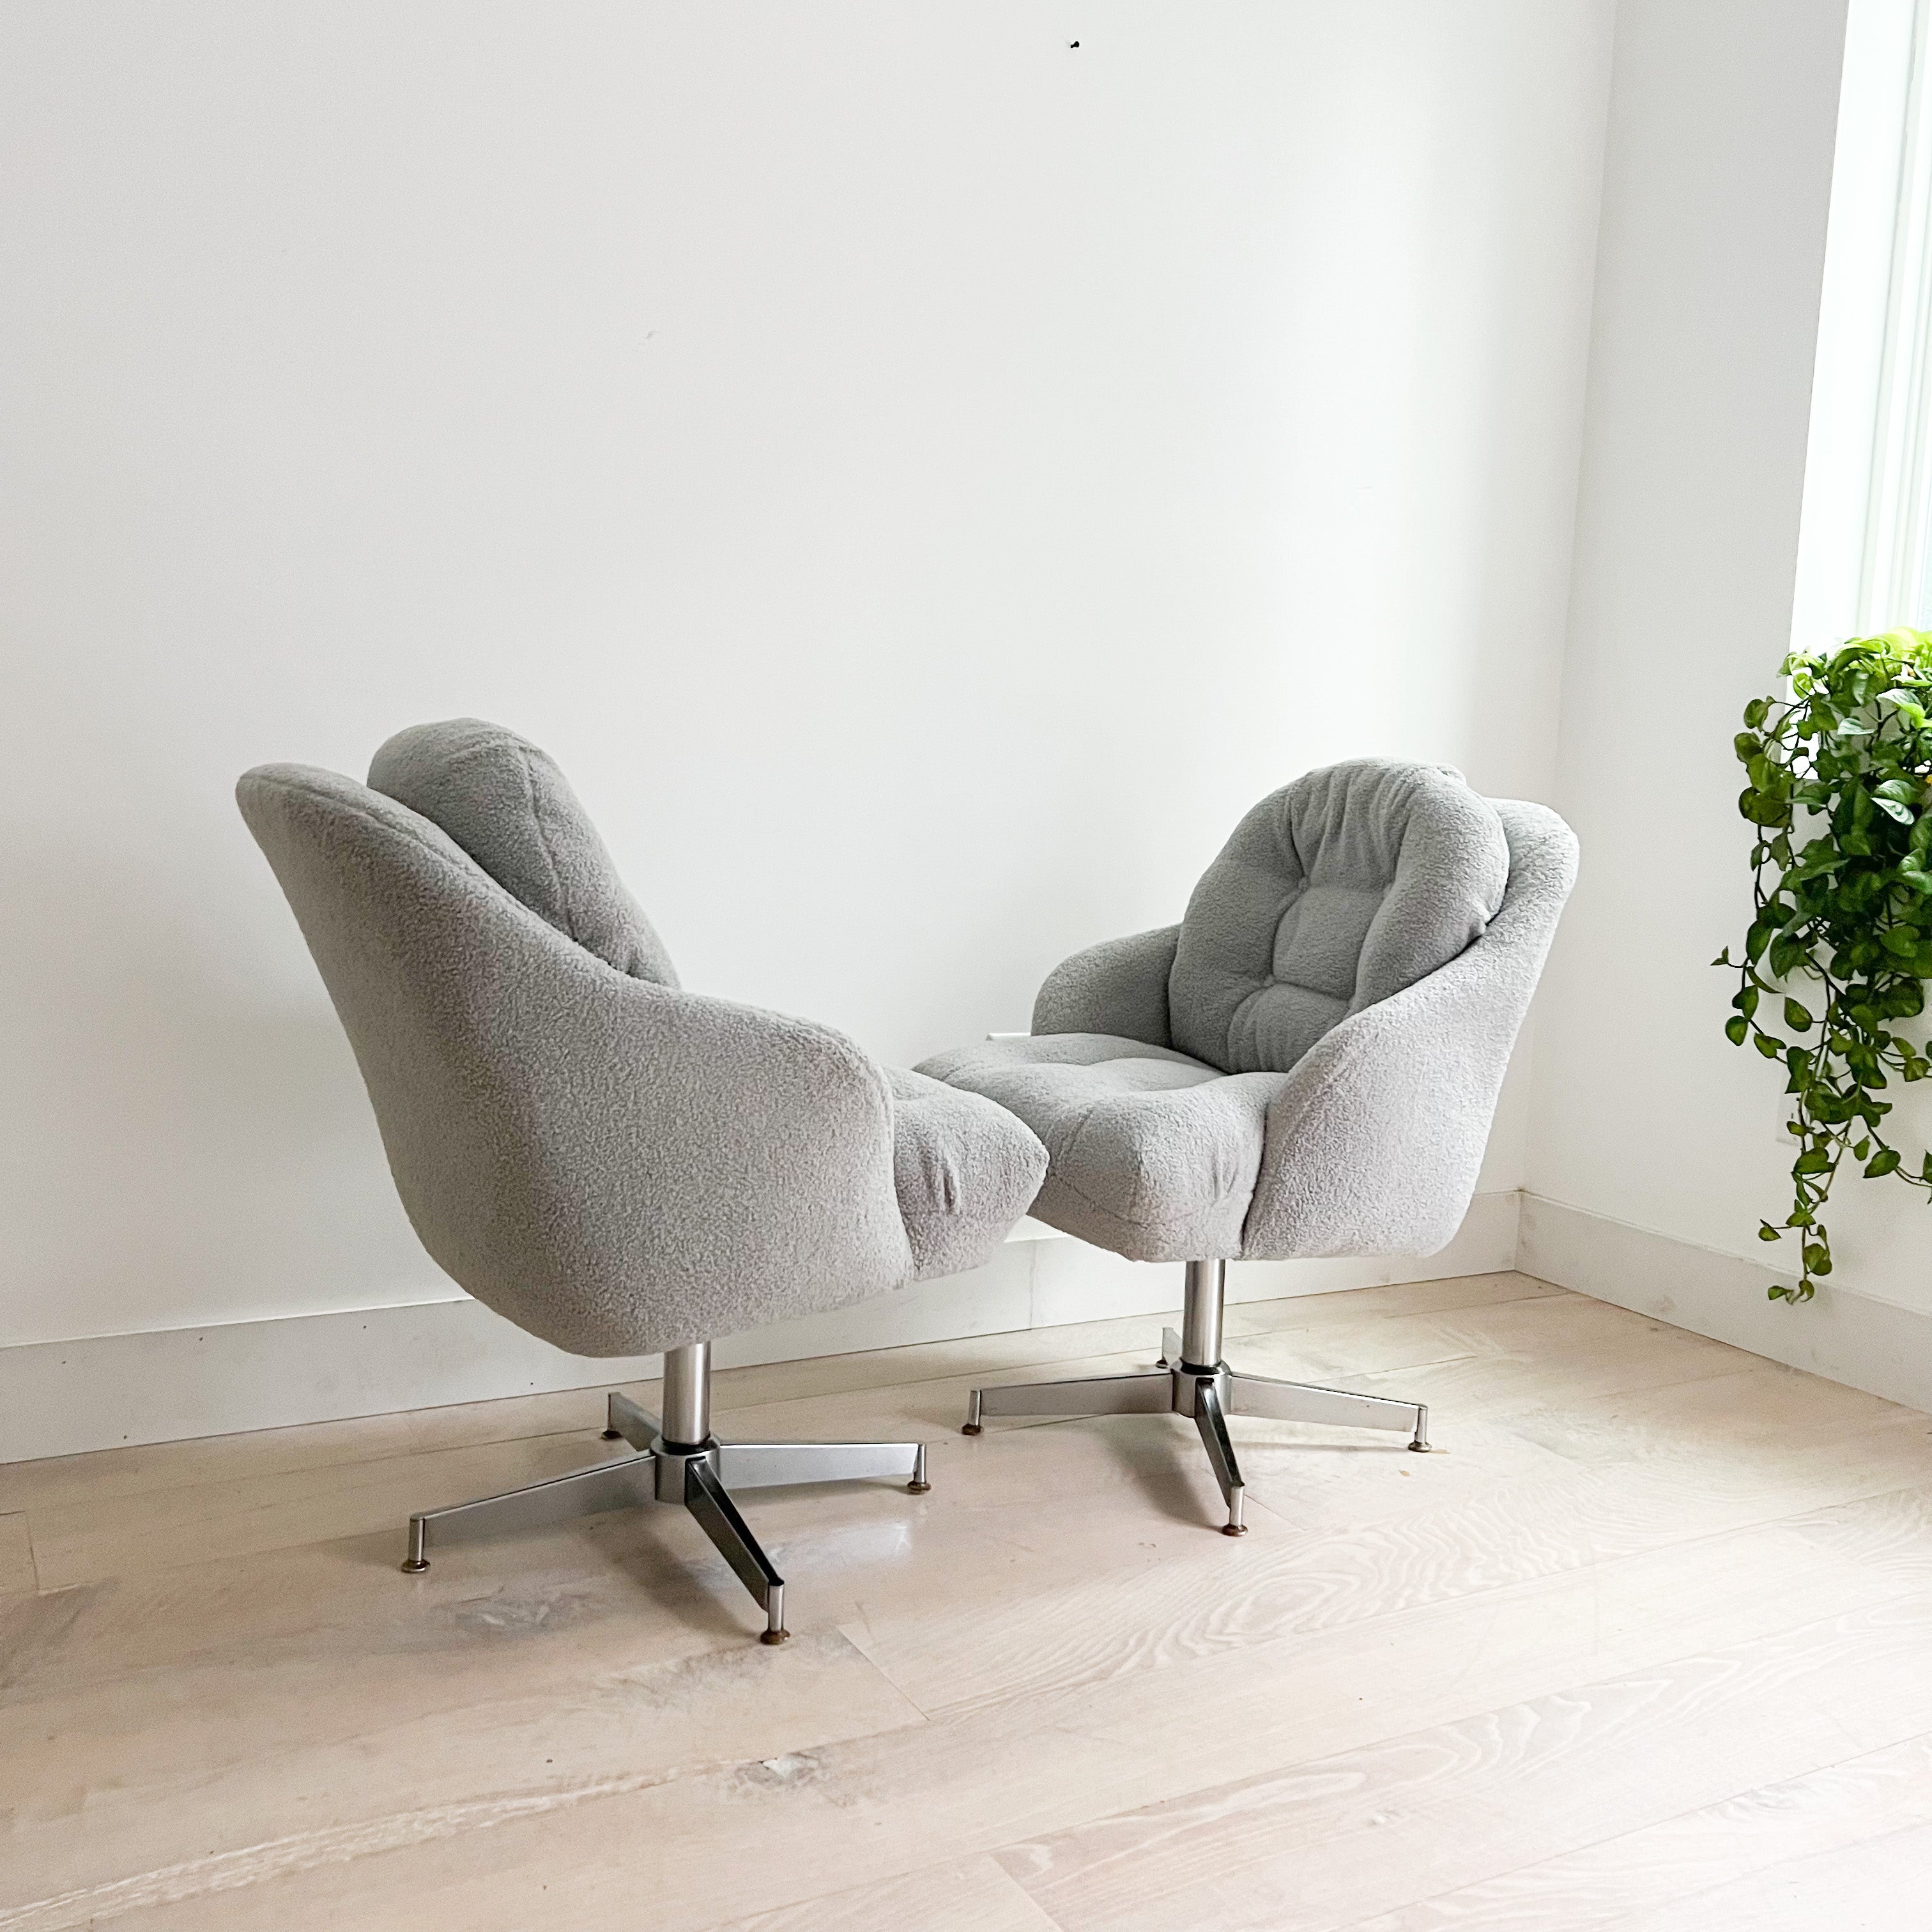 Introducing a captivating pair of vintage swivel lounge chairs, meticulously refurbished to exemplify both comfort and style. These chairs feature brand-new, luxuriously soft light grey shearling upholstery that effortlessly elevates their